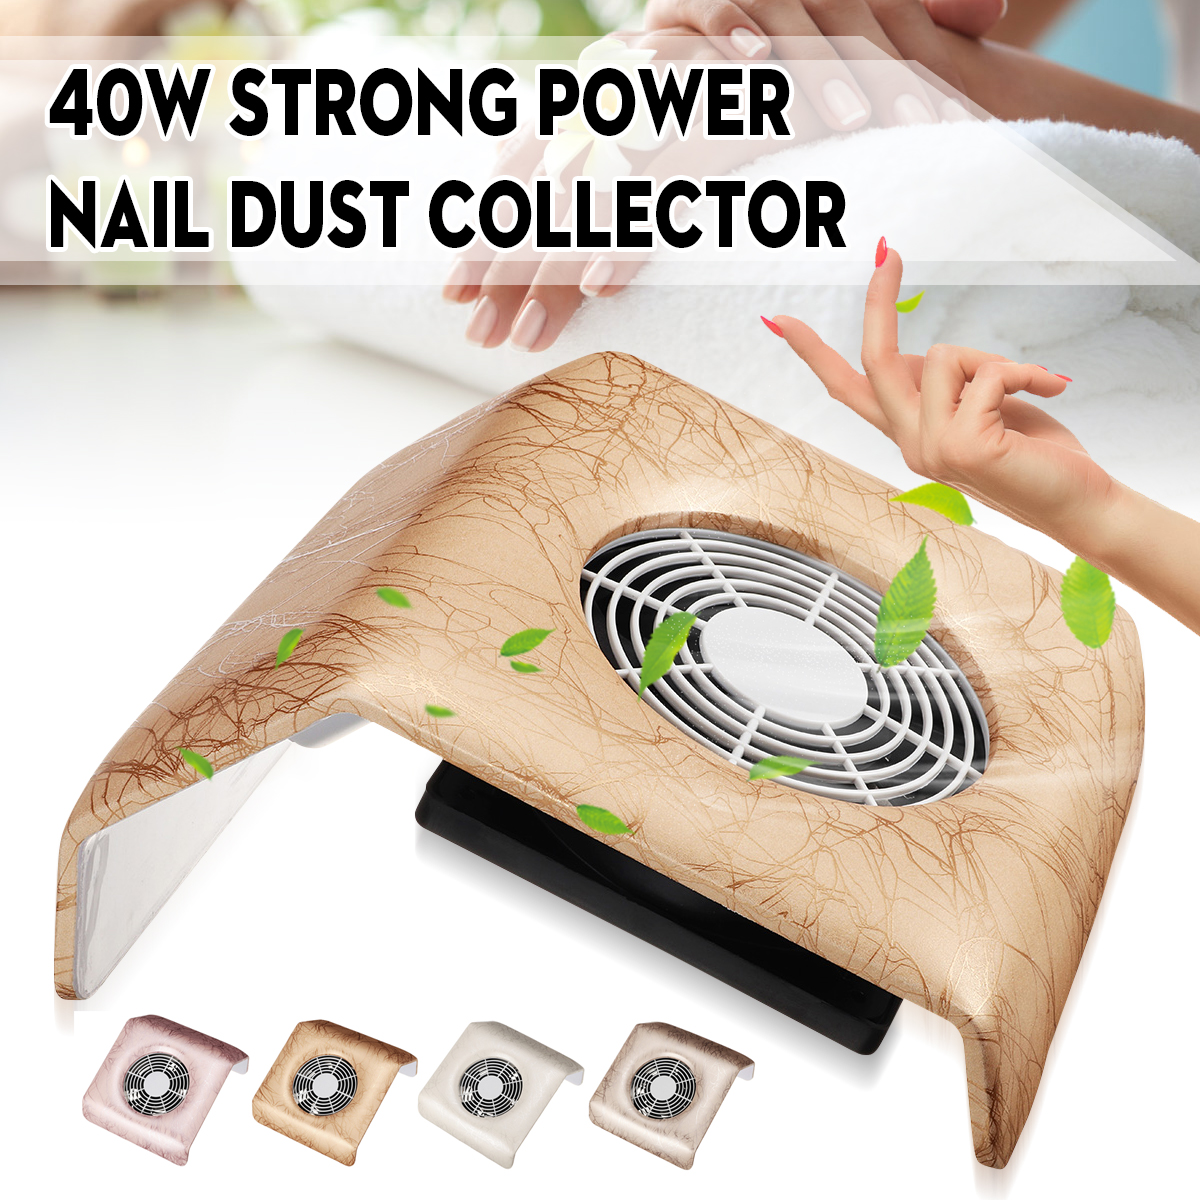 40W-High-Power-Vacuum-Nail-Dust-Collector-For-Manicure-Nails-Collector-With-Fitter-Nail-Dust-Fan-Vac-1940609-1